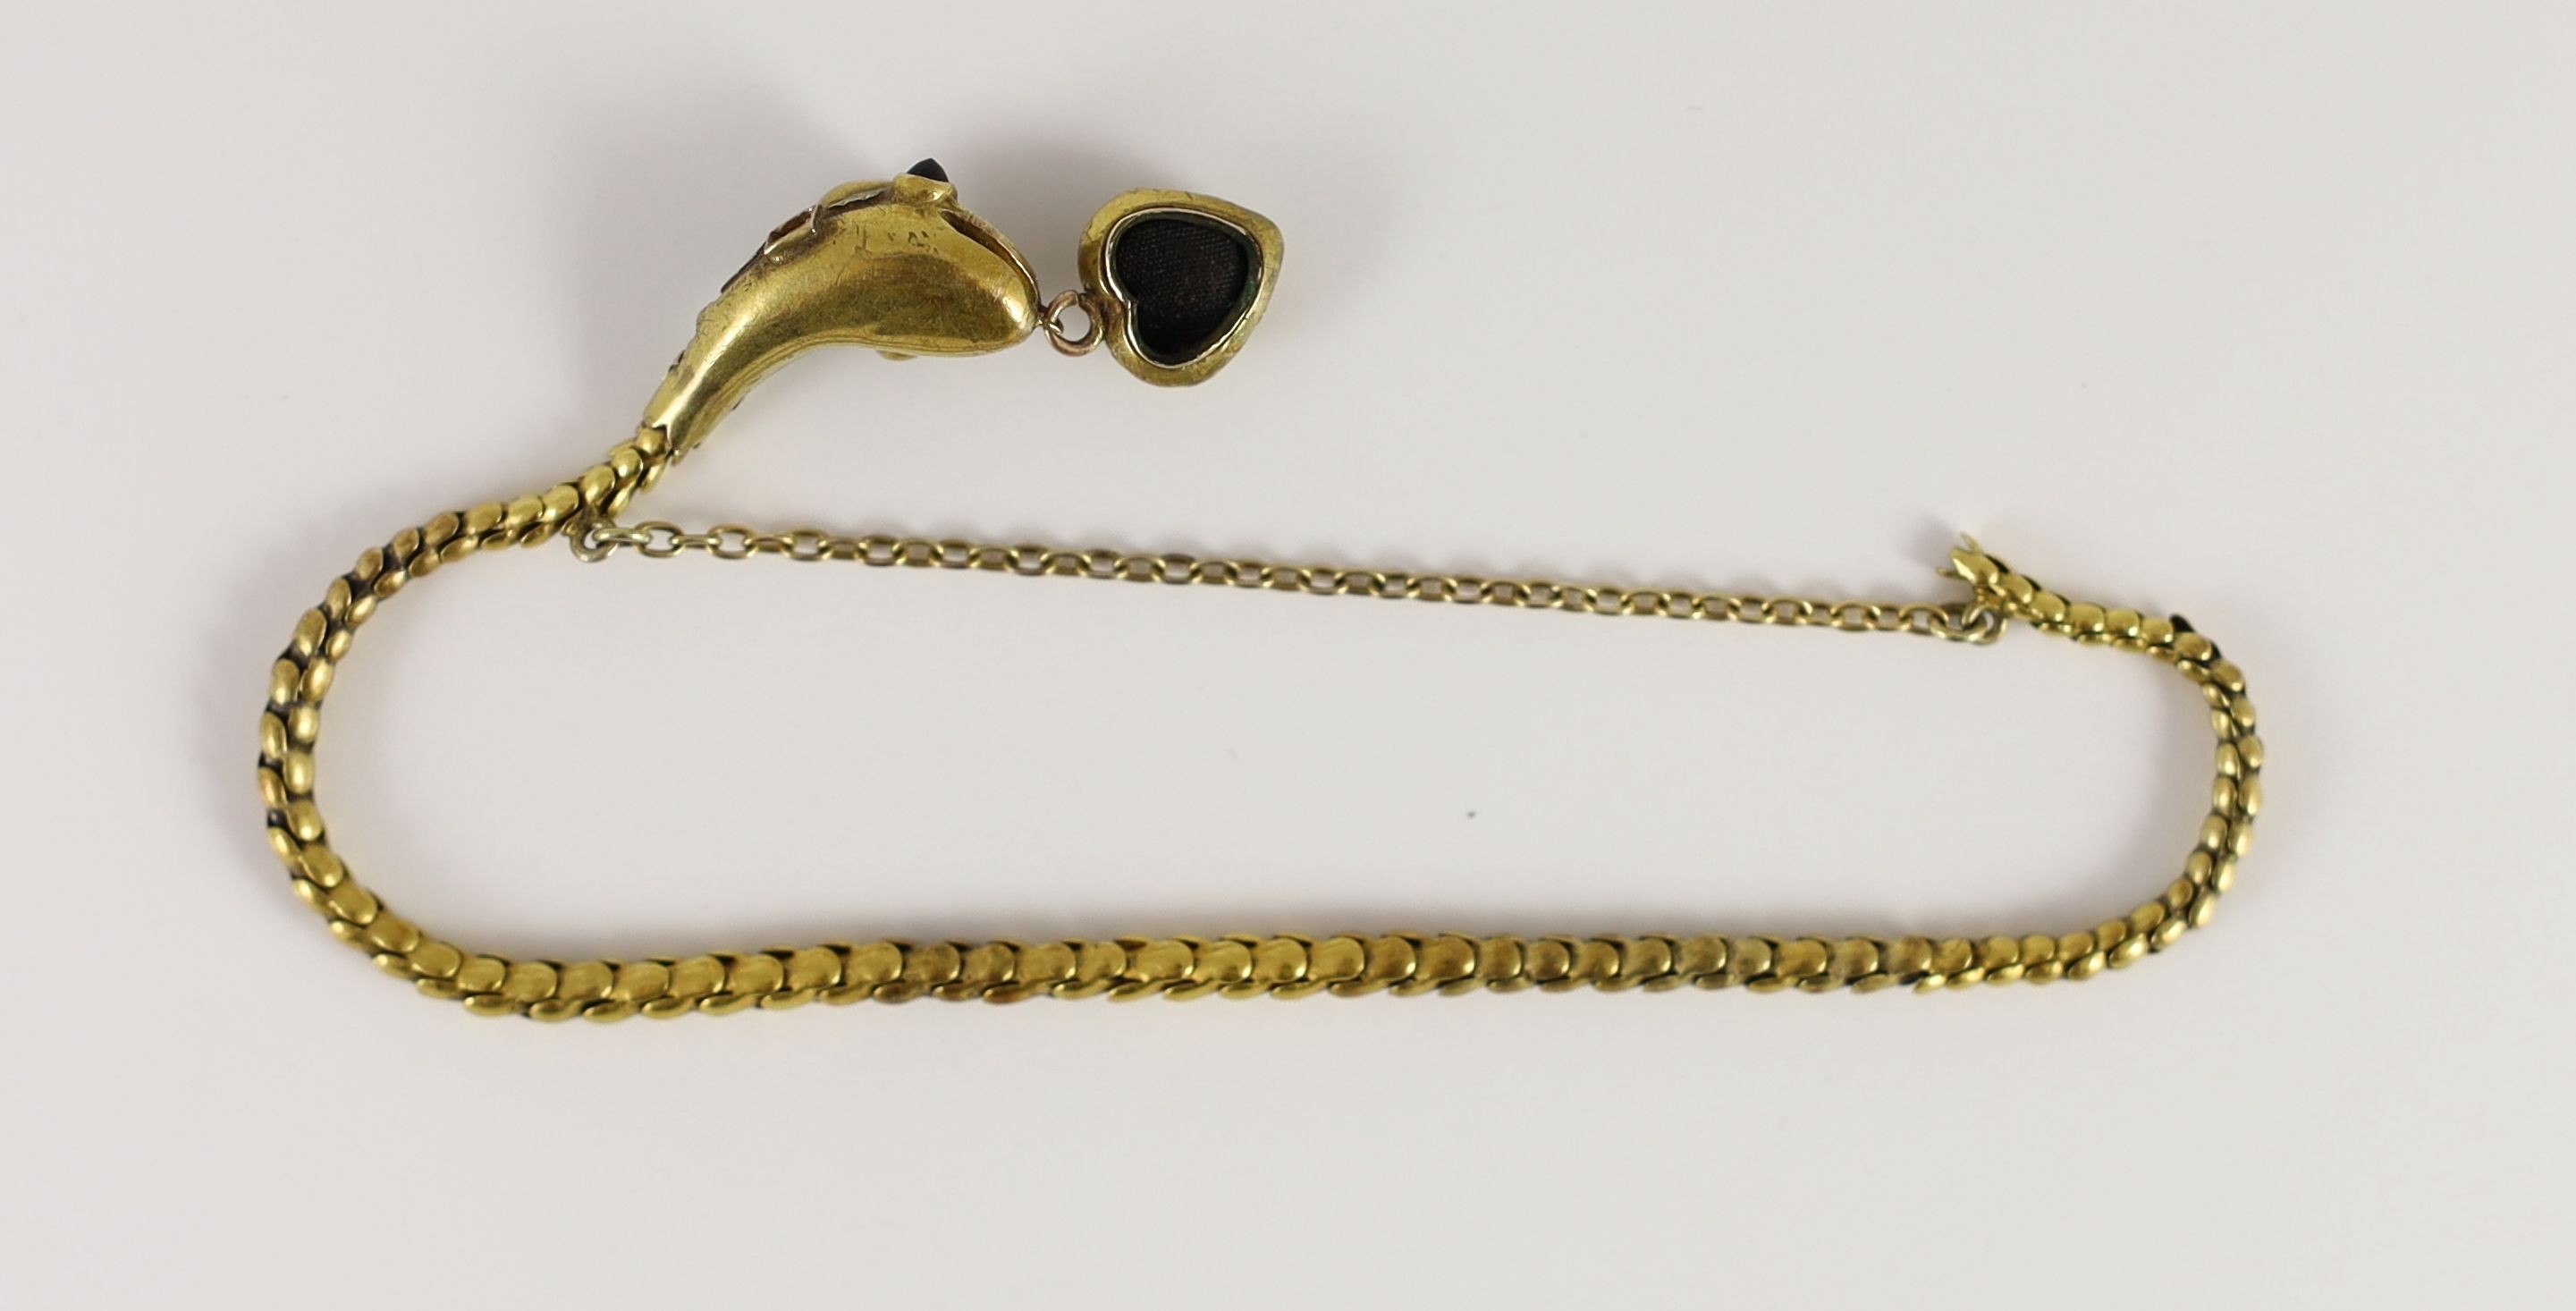 An early 19th century two colour gold and foil backed pink gem set serpent head and snake link bracelet